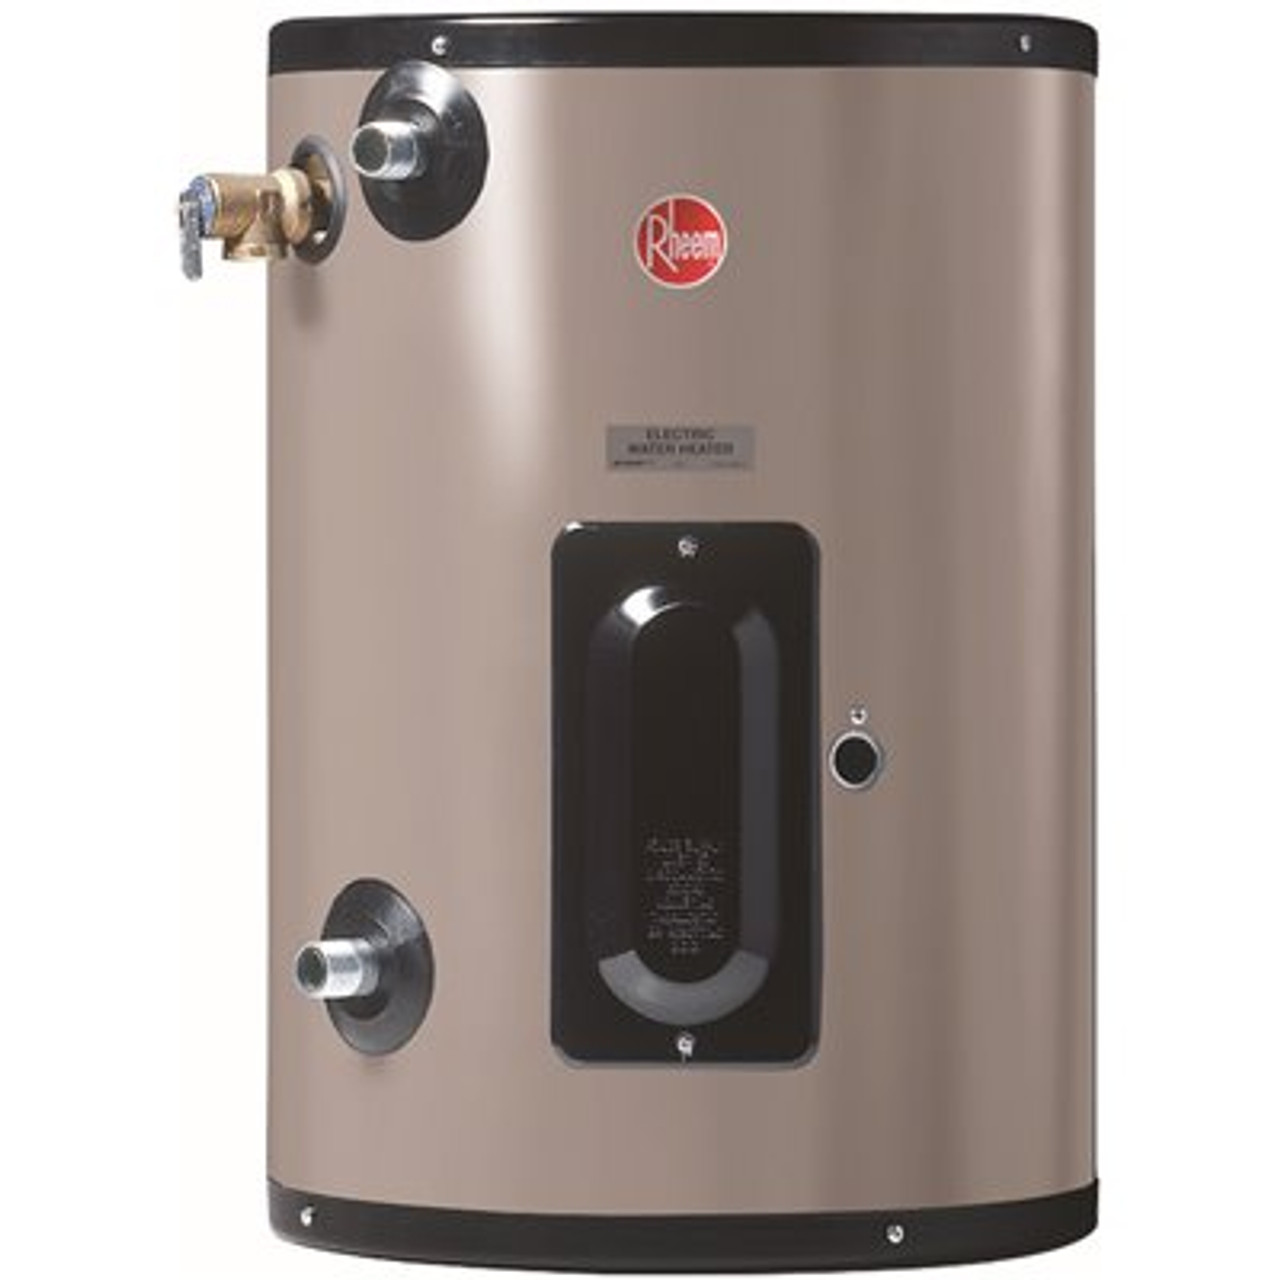 Rheem Commercial Point of Use 15 Gal. 120-Volt 2kw 1 Phase Electric Tank Water Heater